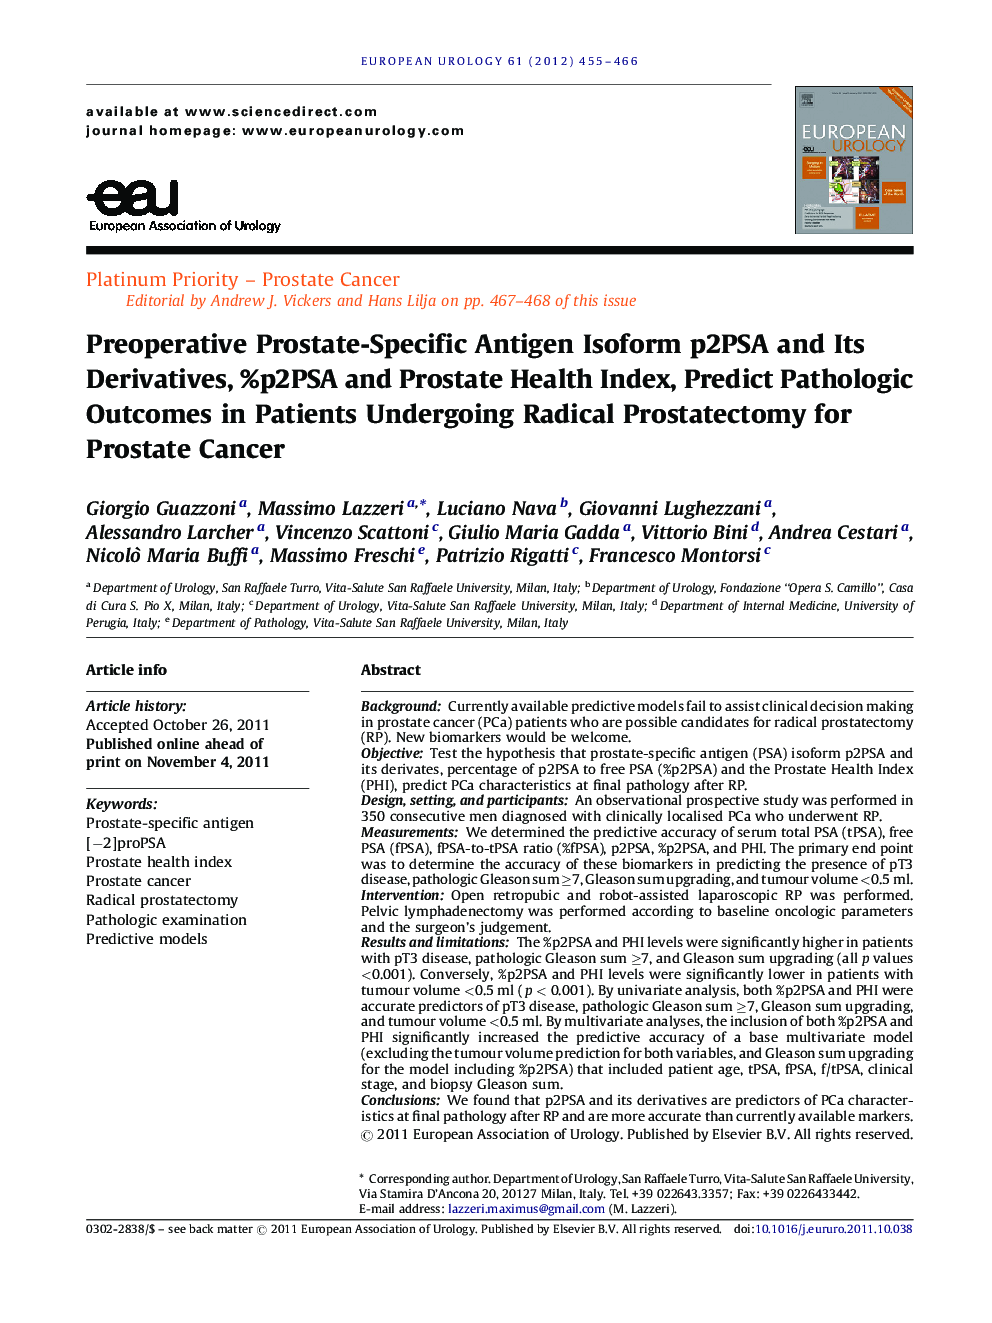 Preoperative Prostate-Specific Antigen Isoform p2PSA and Its Derivatives, %p2PSA and Prostate Health Index, Predict Pathologic Outcomes in Patients Undergoing Radical Prostatectomy for Prostate Cancer